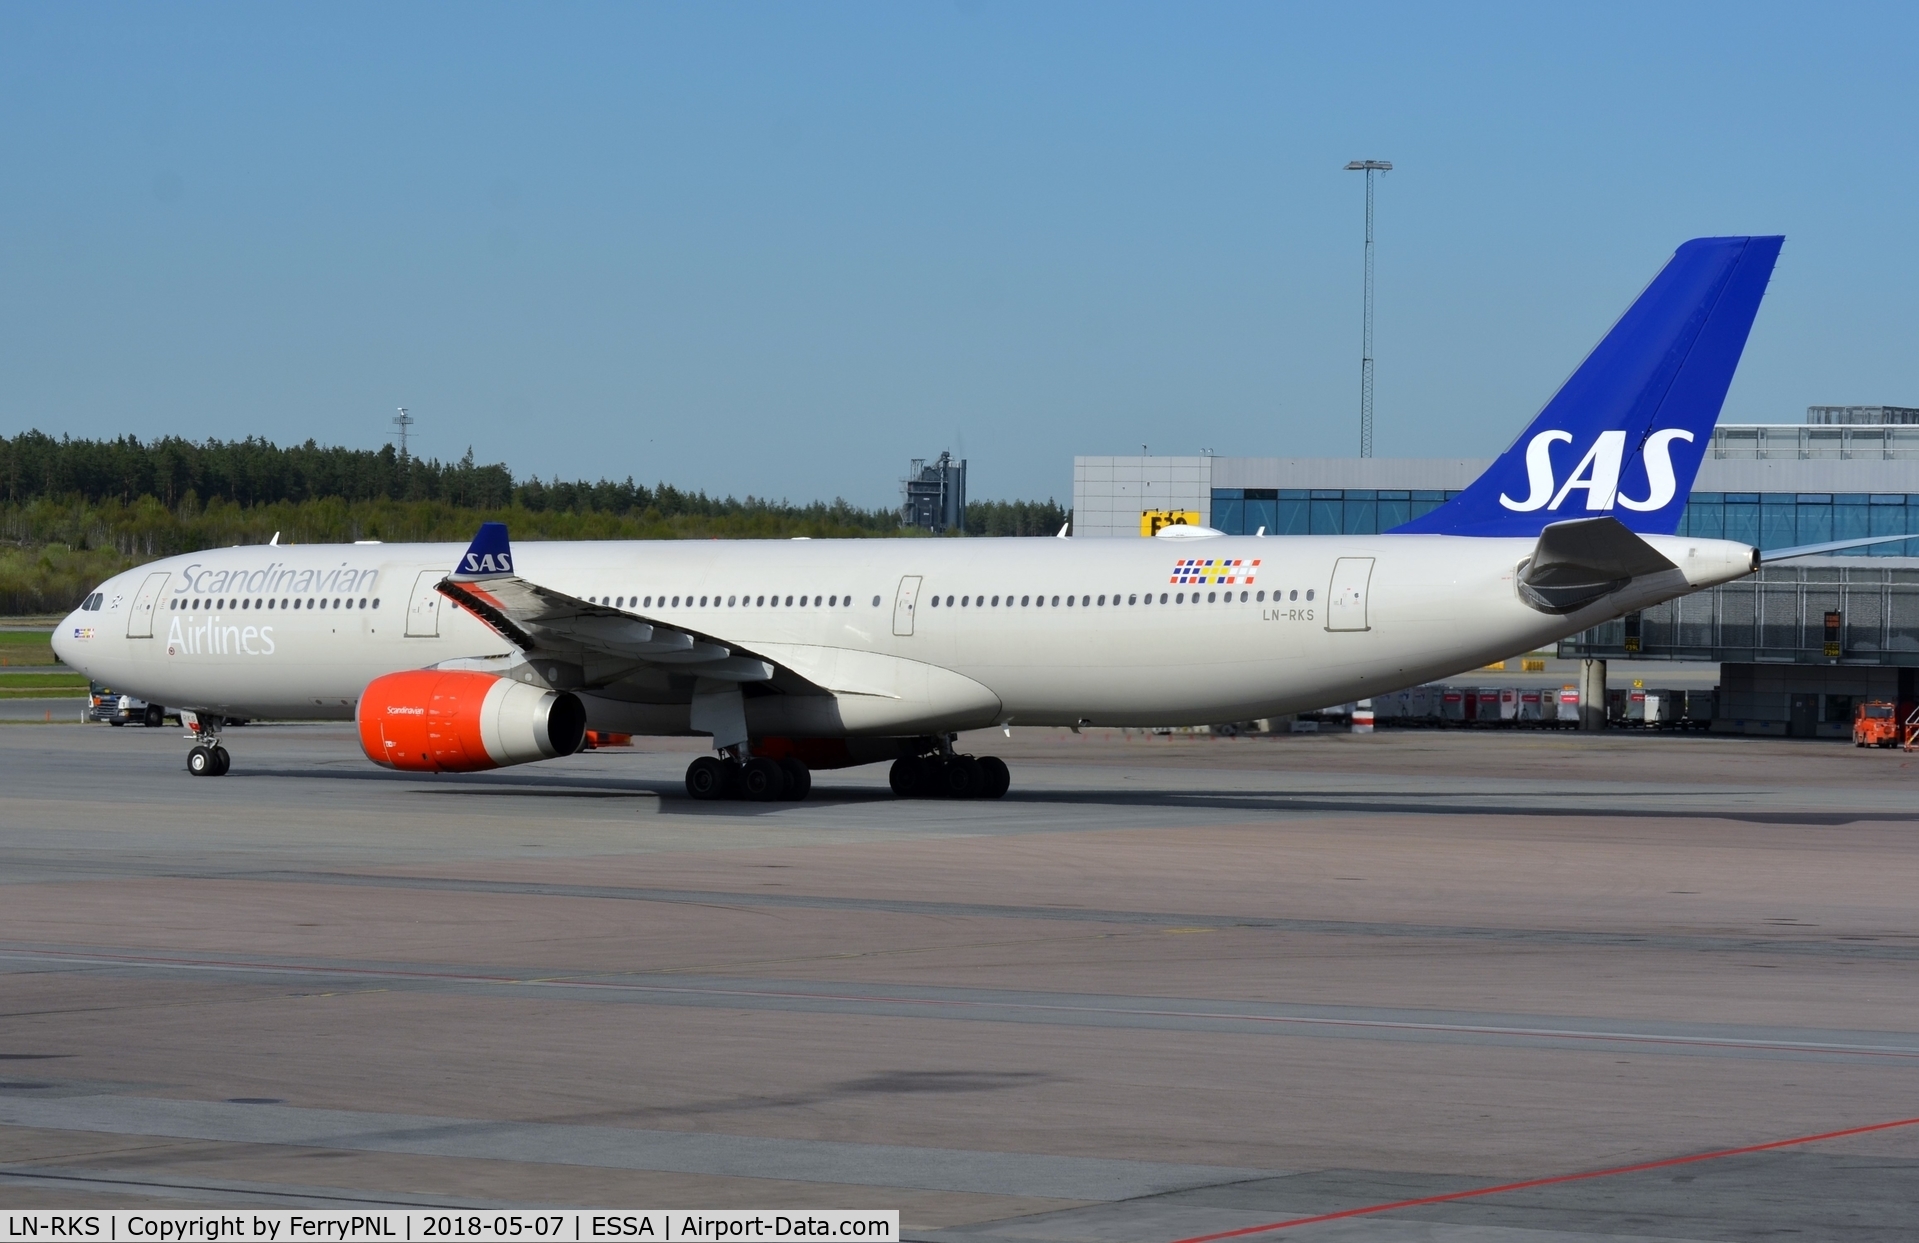 LN-RKS, 2015 Airbus A330-343E C/N 1665, SAS A333 pushed-back for departure.